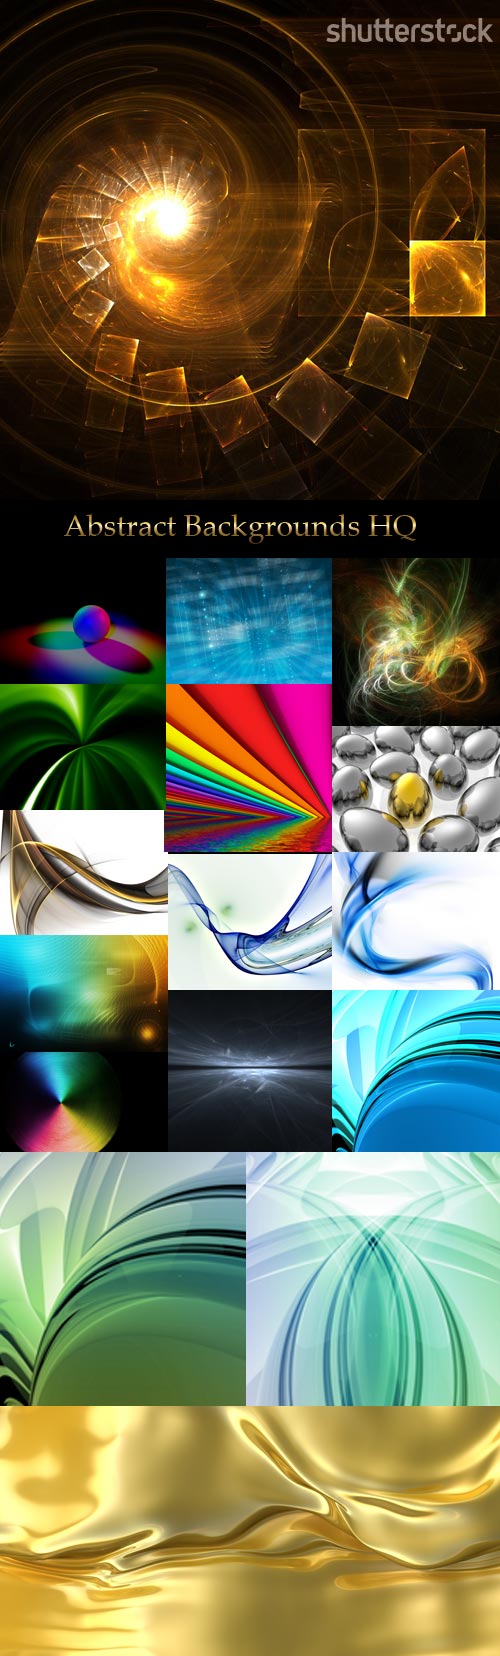 Shutterstock Abstract Backgrounds